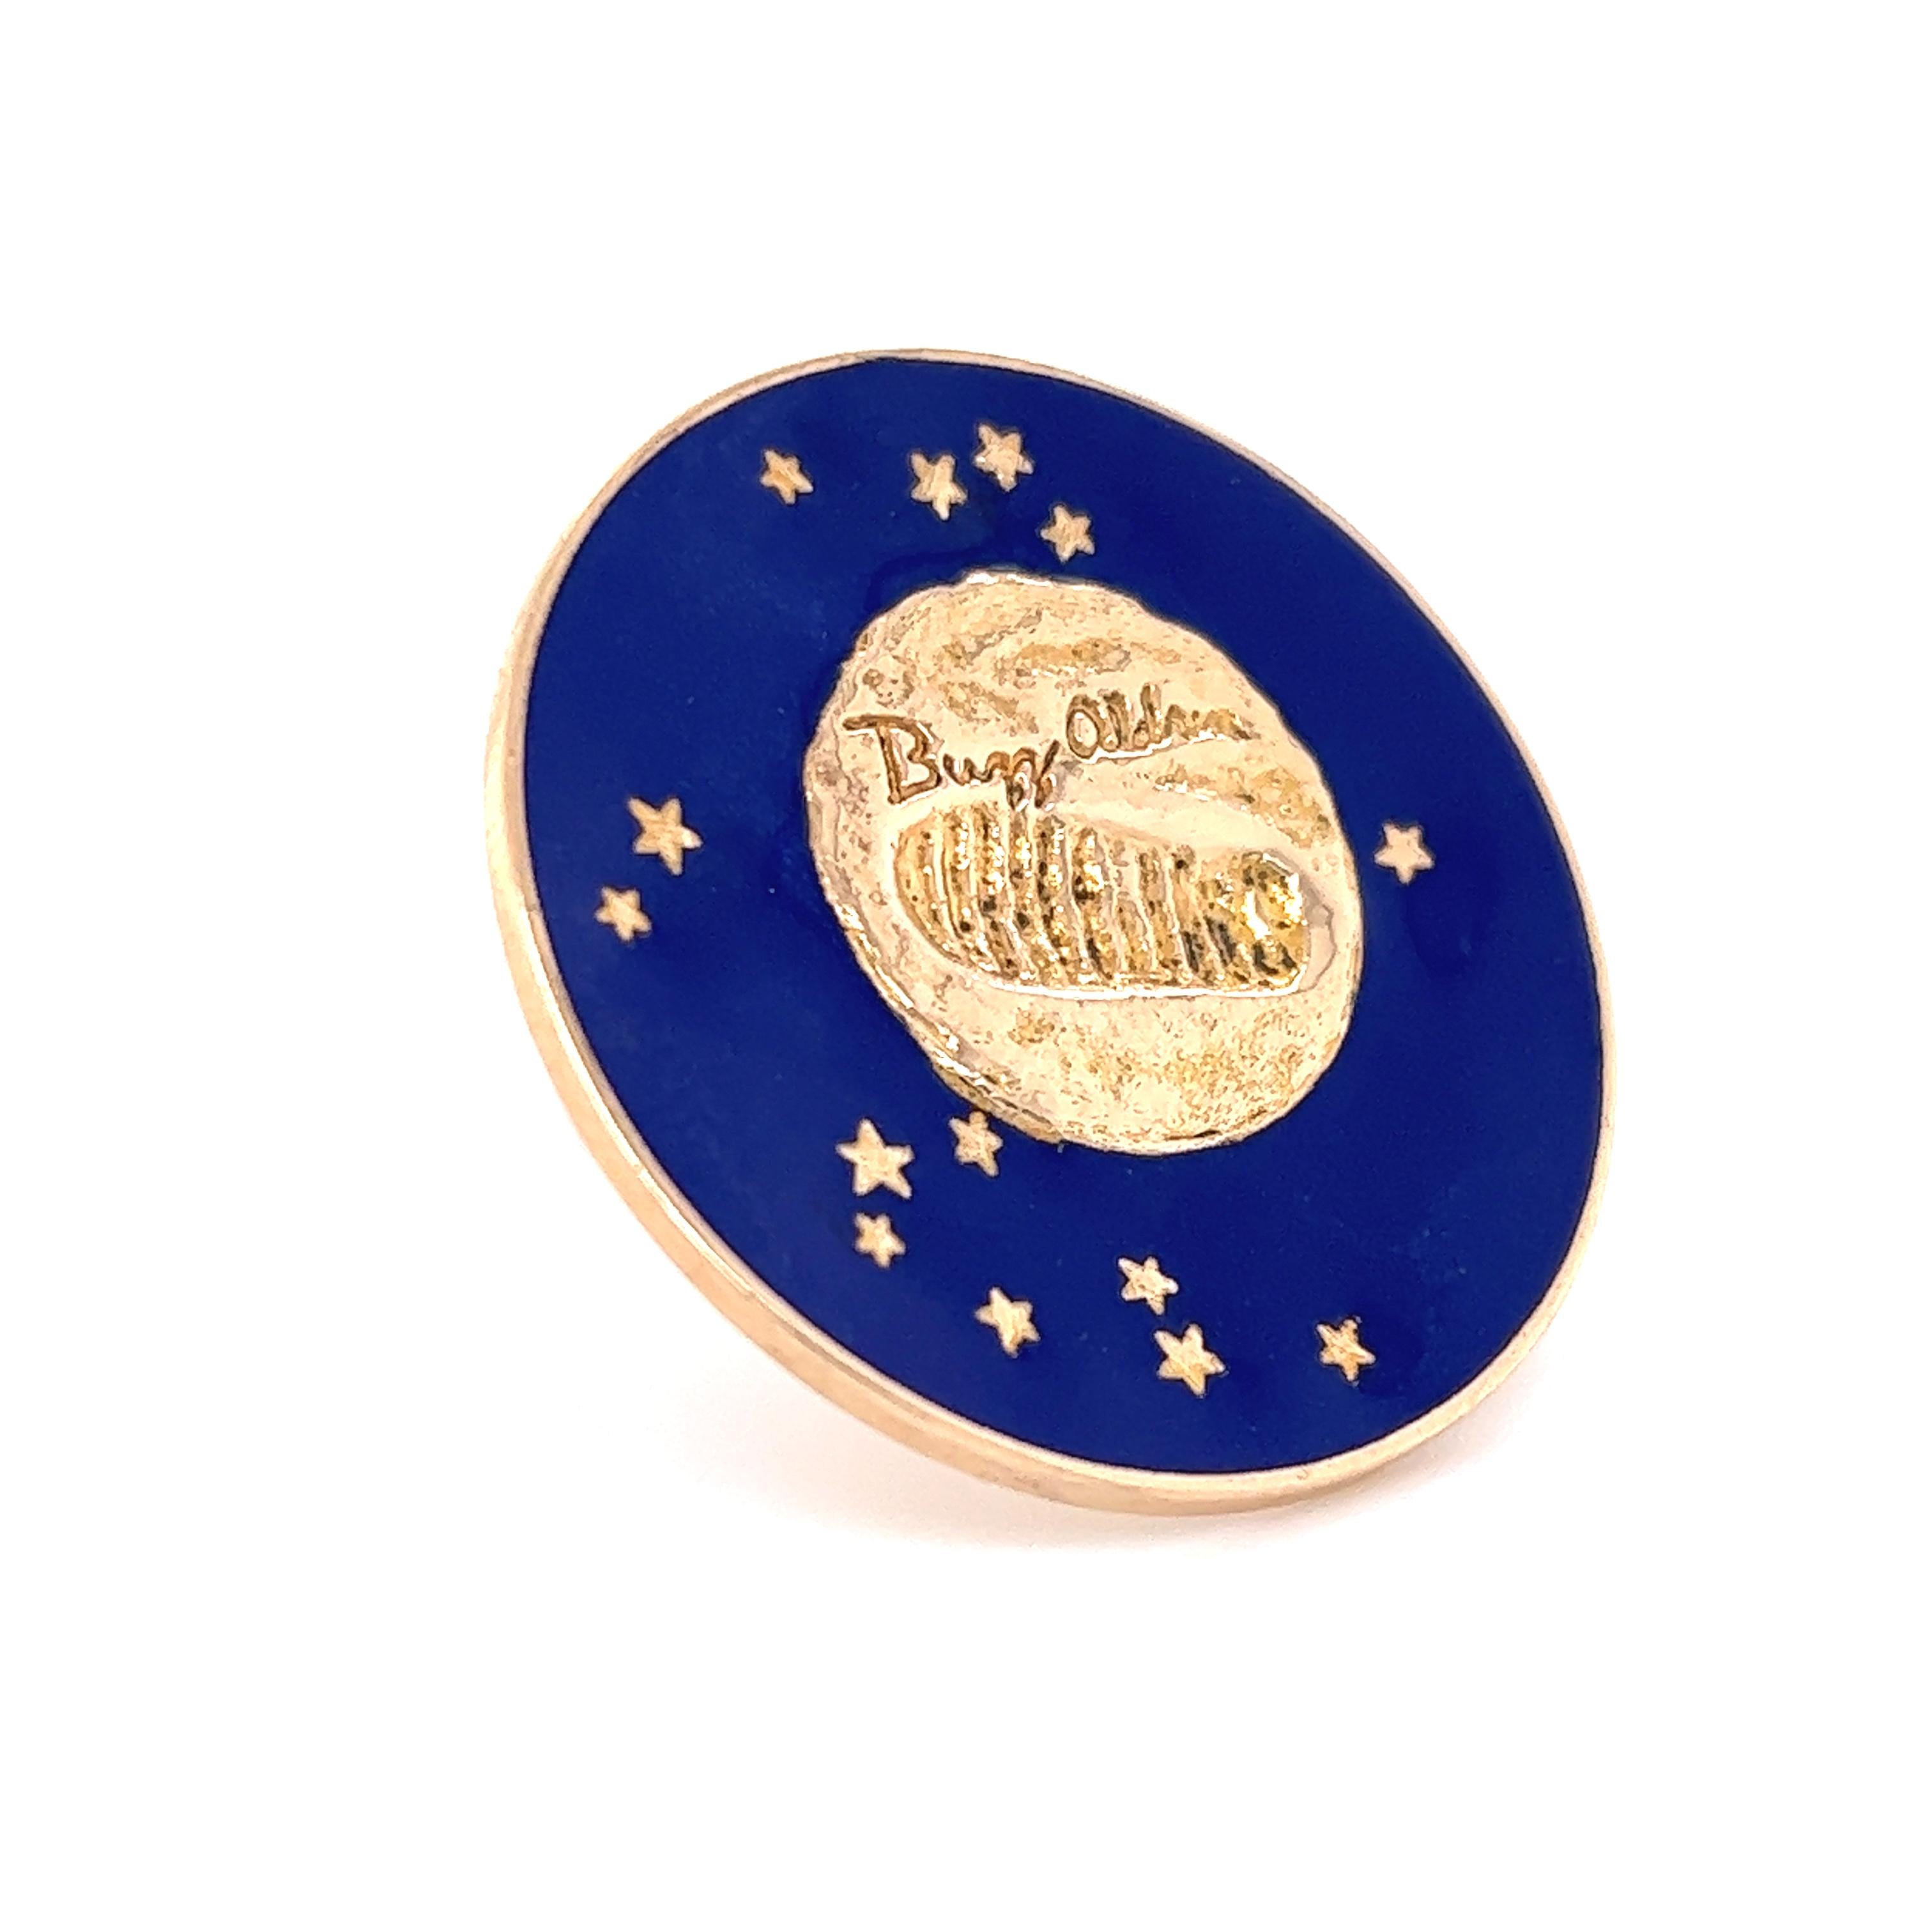 Beautiful 14k yellow gold commemorative pin crafted by Tiffany & Co. The pendant is decorated with a vibrant blue enamel with golden colored stars. The design centers around a representation of a footprint on the moon with a facsimile of Buzz